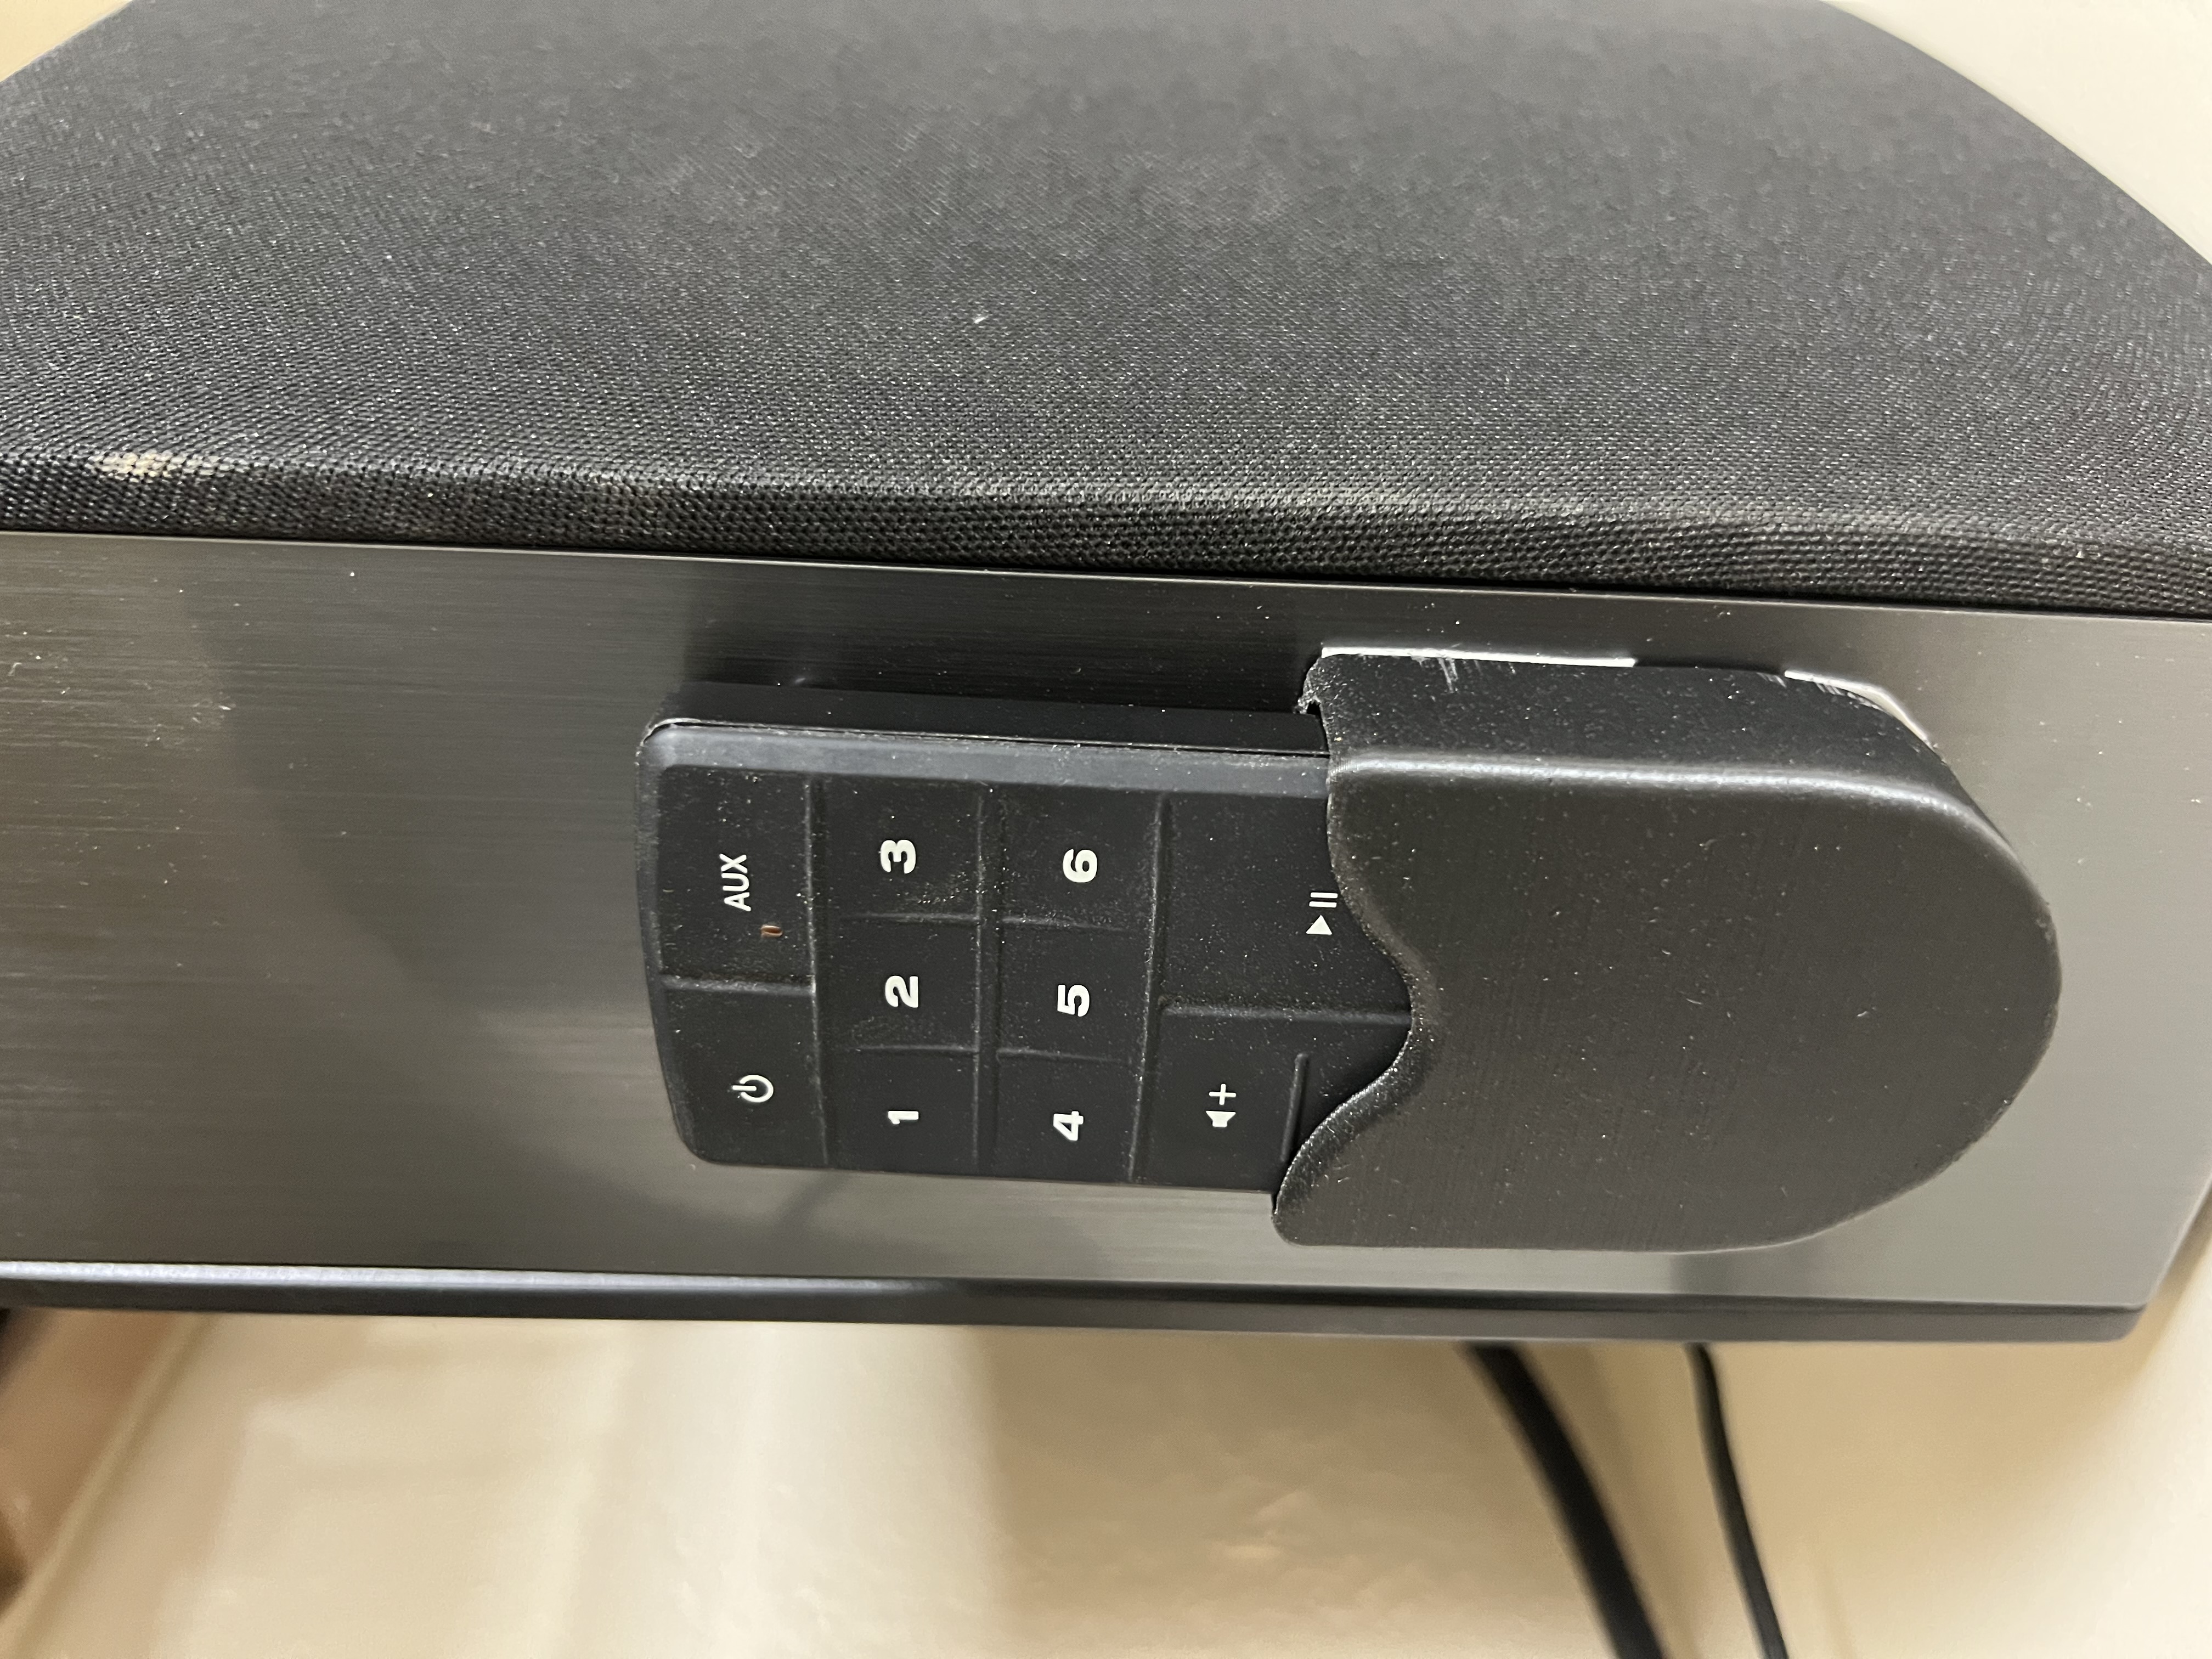 Soundtouch Remote Holder